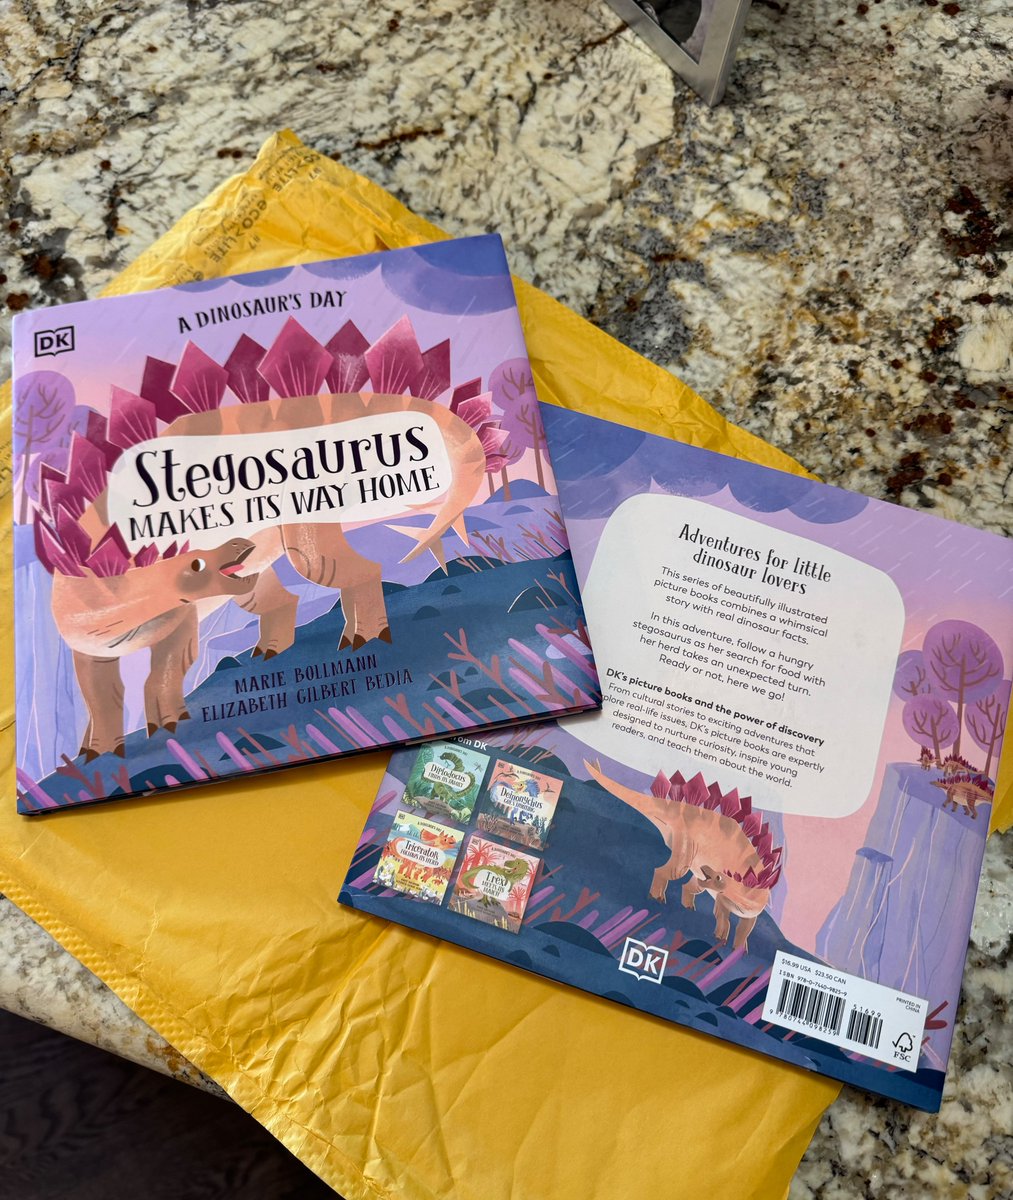 Look who showed up on my doorstep!📚 

STEGOSAURUS MAKES ITS WAY HOME trudges into bookstores and libraries on MAY 21ST! ❤️🦕❤️
Available for preorder now!

#mariebollmann @dkbooks @dkpublishing  #kidlit #kidlitart  #picturebooks #dinosaurs #stegosaurus #dinobooks #kidsbooks